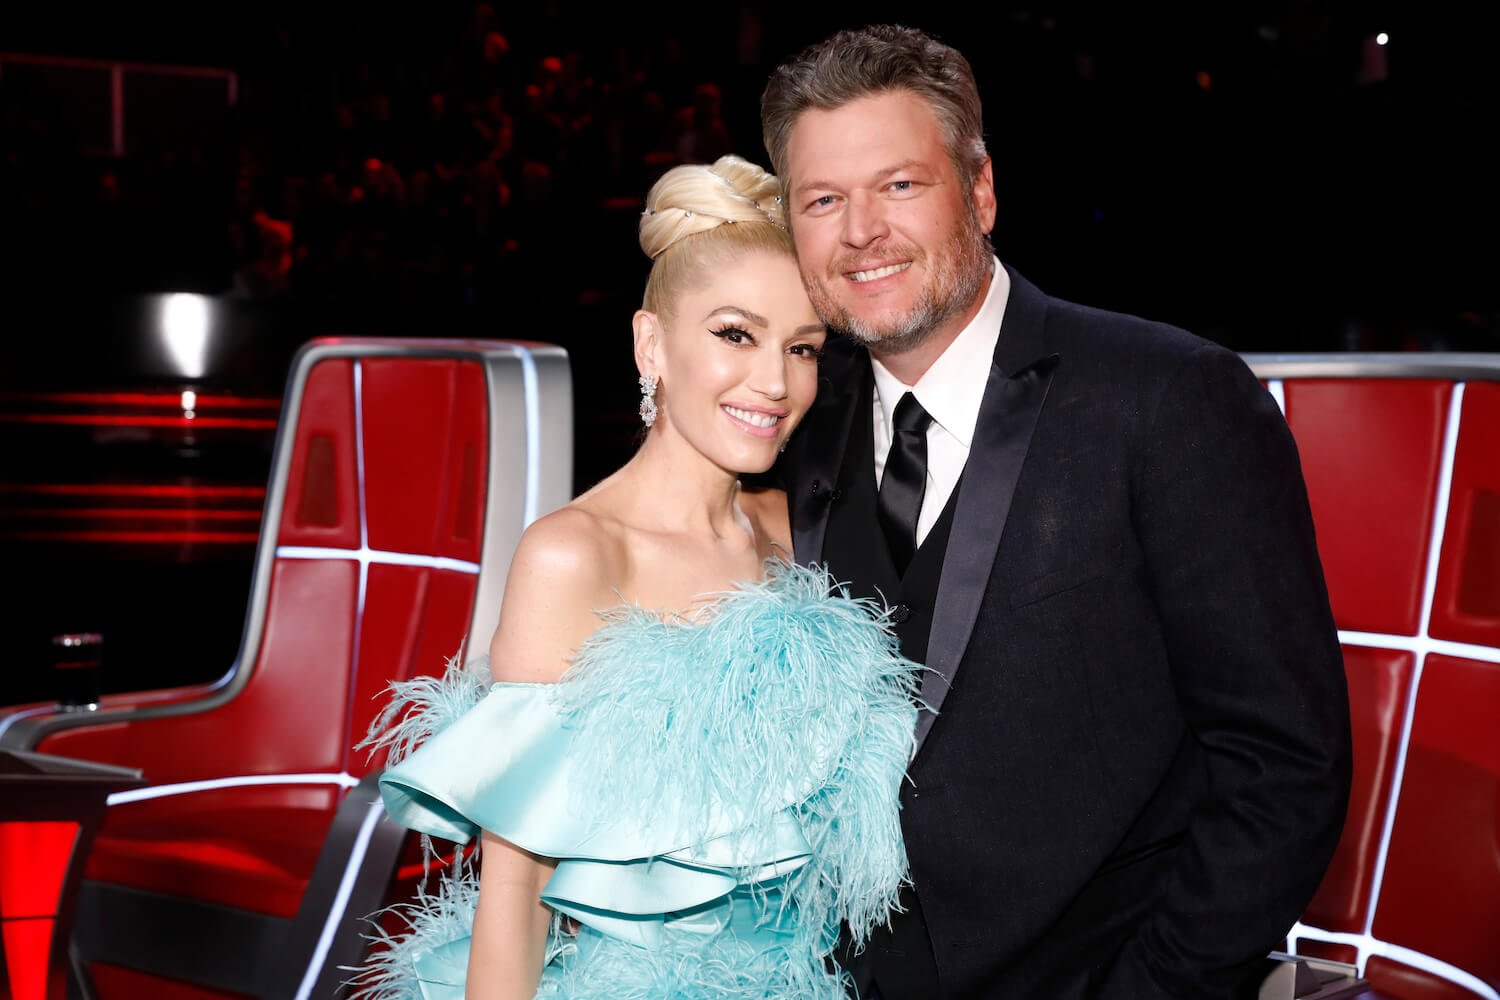 Gwen Stefani and Blake Shelton on 'The Voice' smiling together